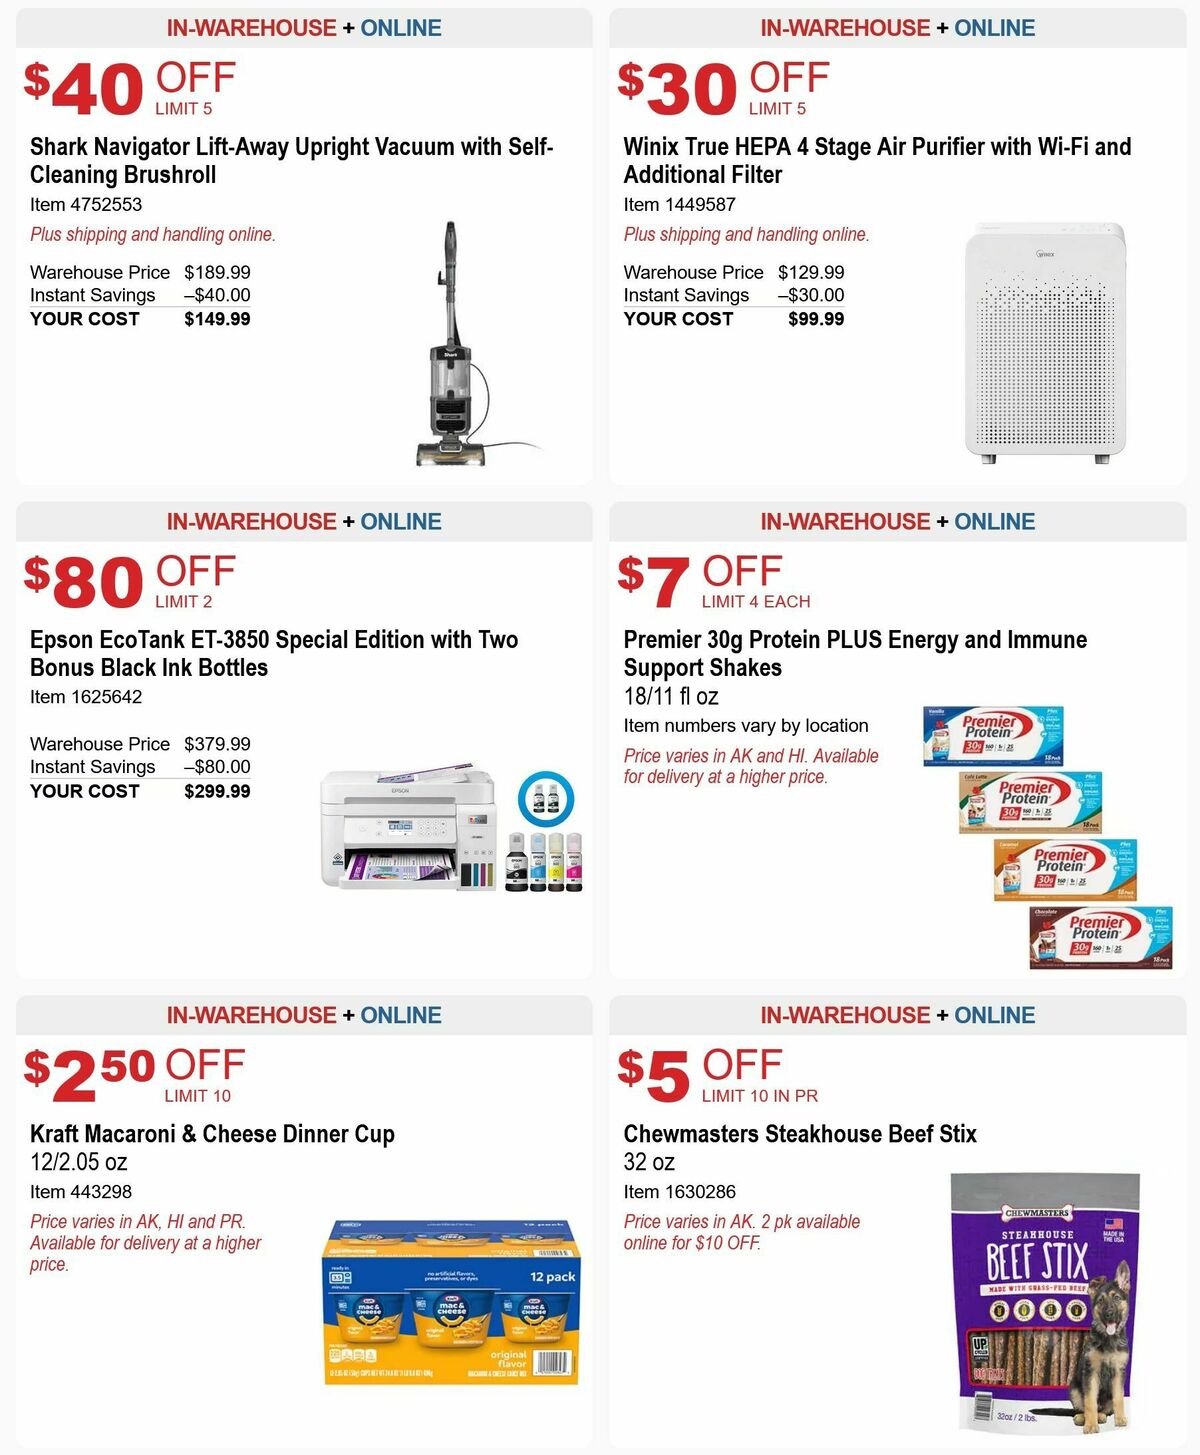 Costco Hot Buys Weekly Ad from August 26